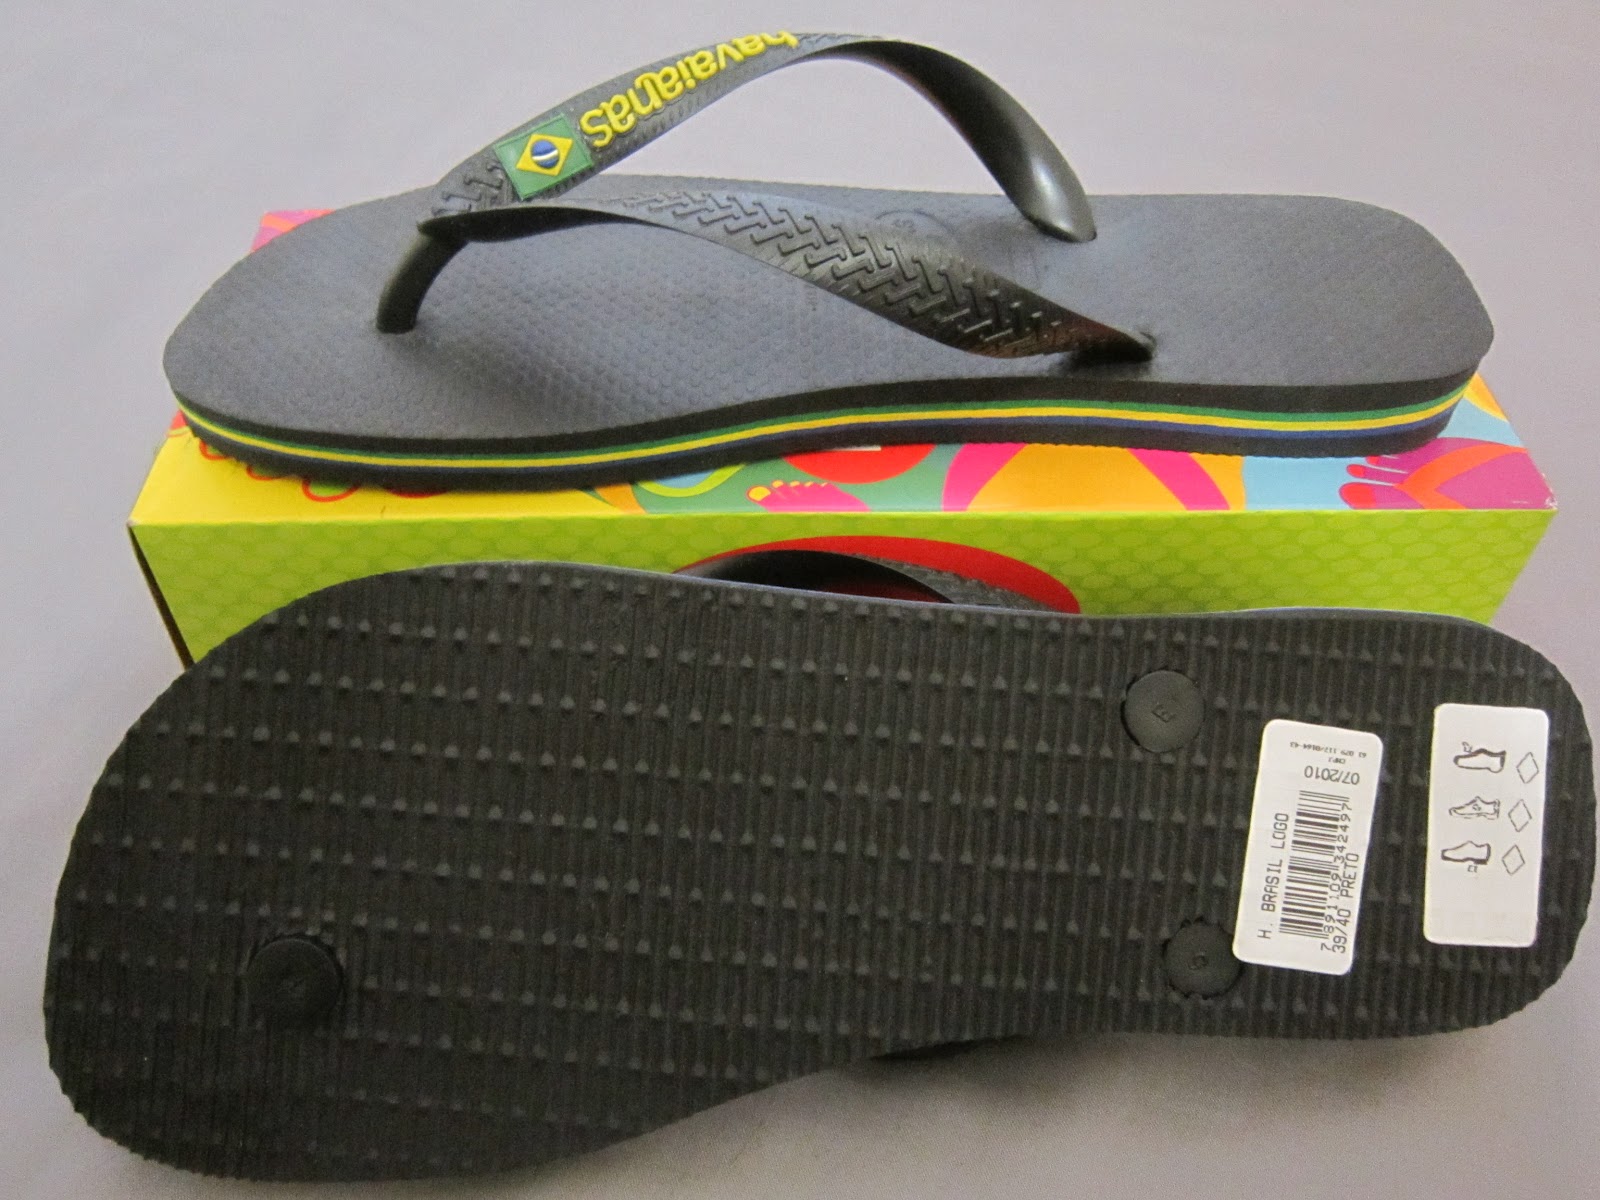 Nurih's Outlet: SOLD! HAVAIANAS FLIP FLOP - MADE IN BRAZIL